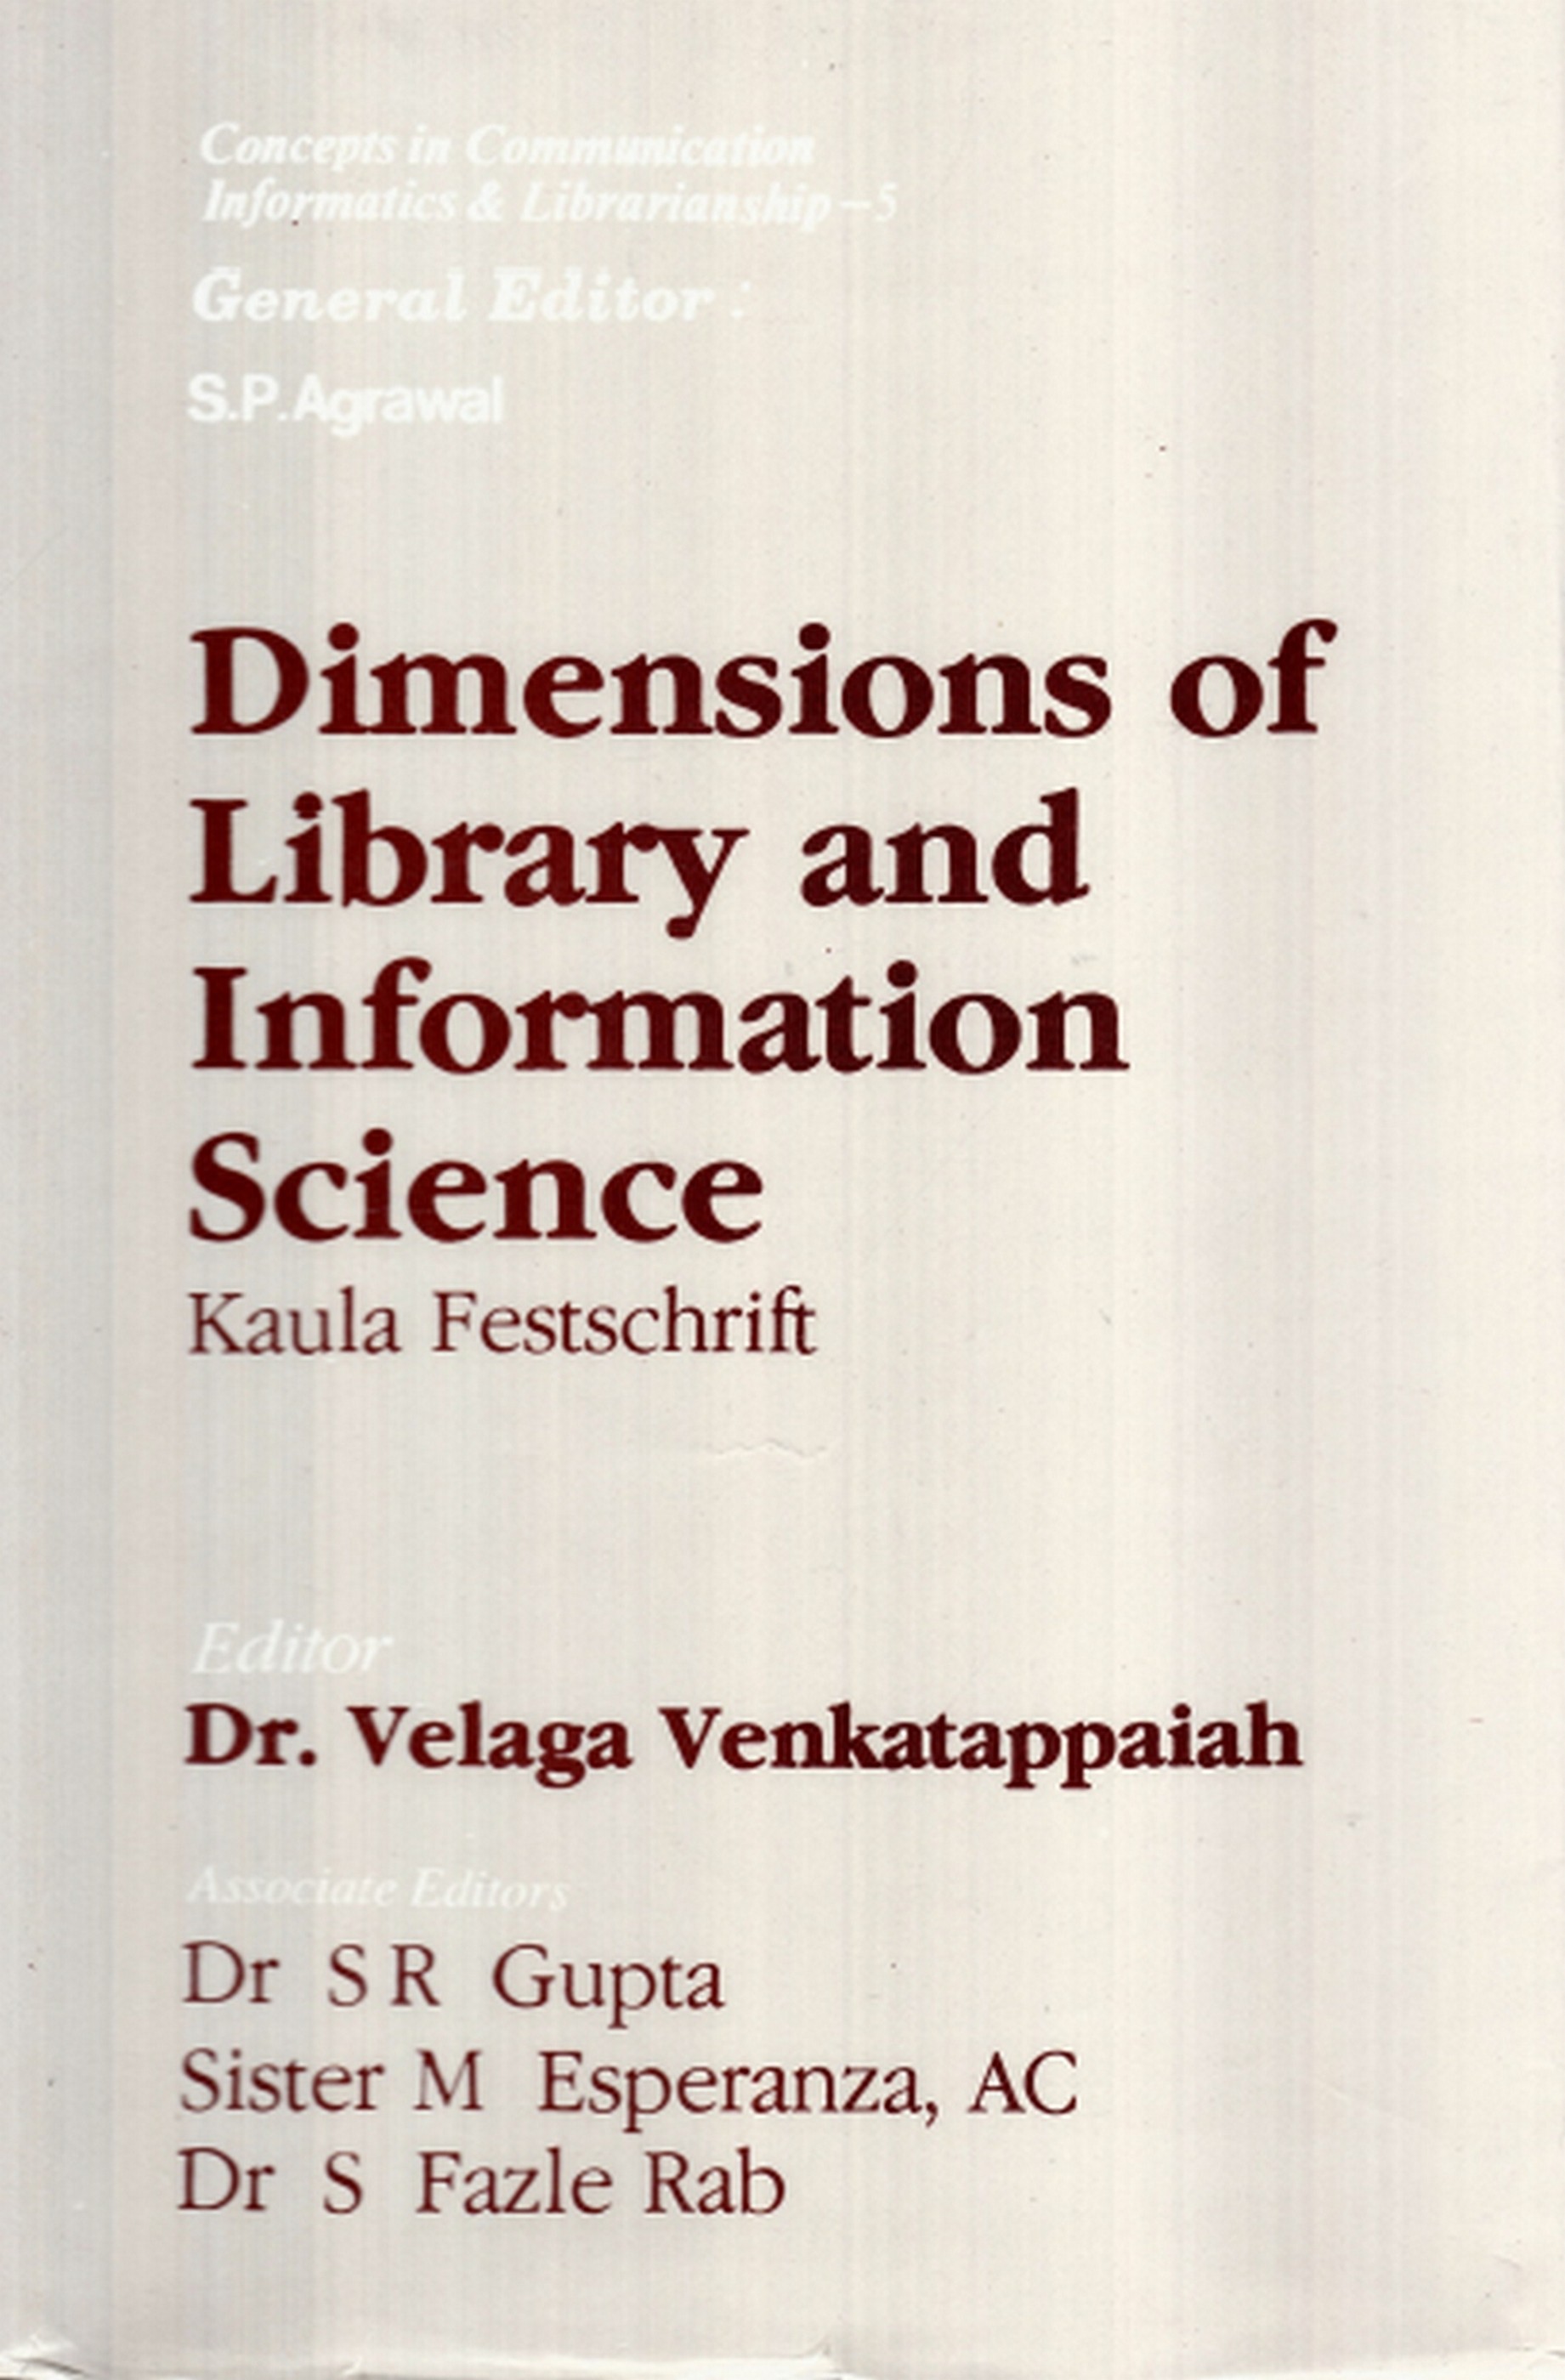 Dimensions of Library and Information Science Kaula Festschrift